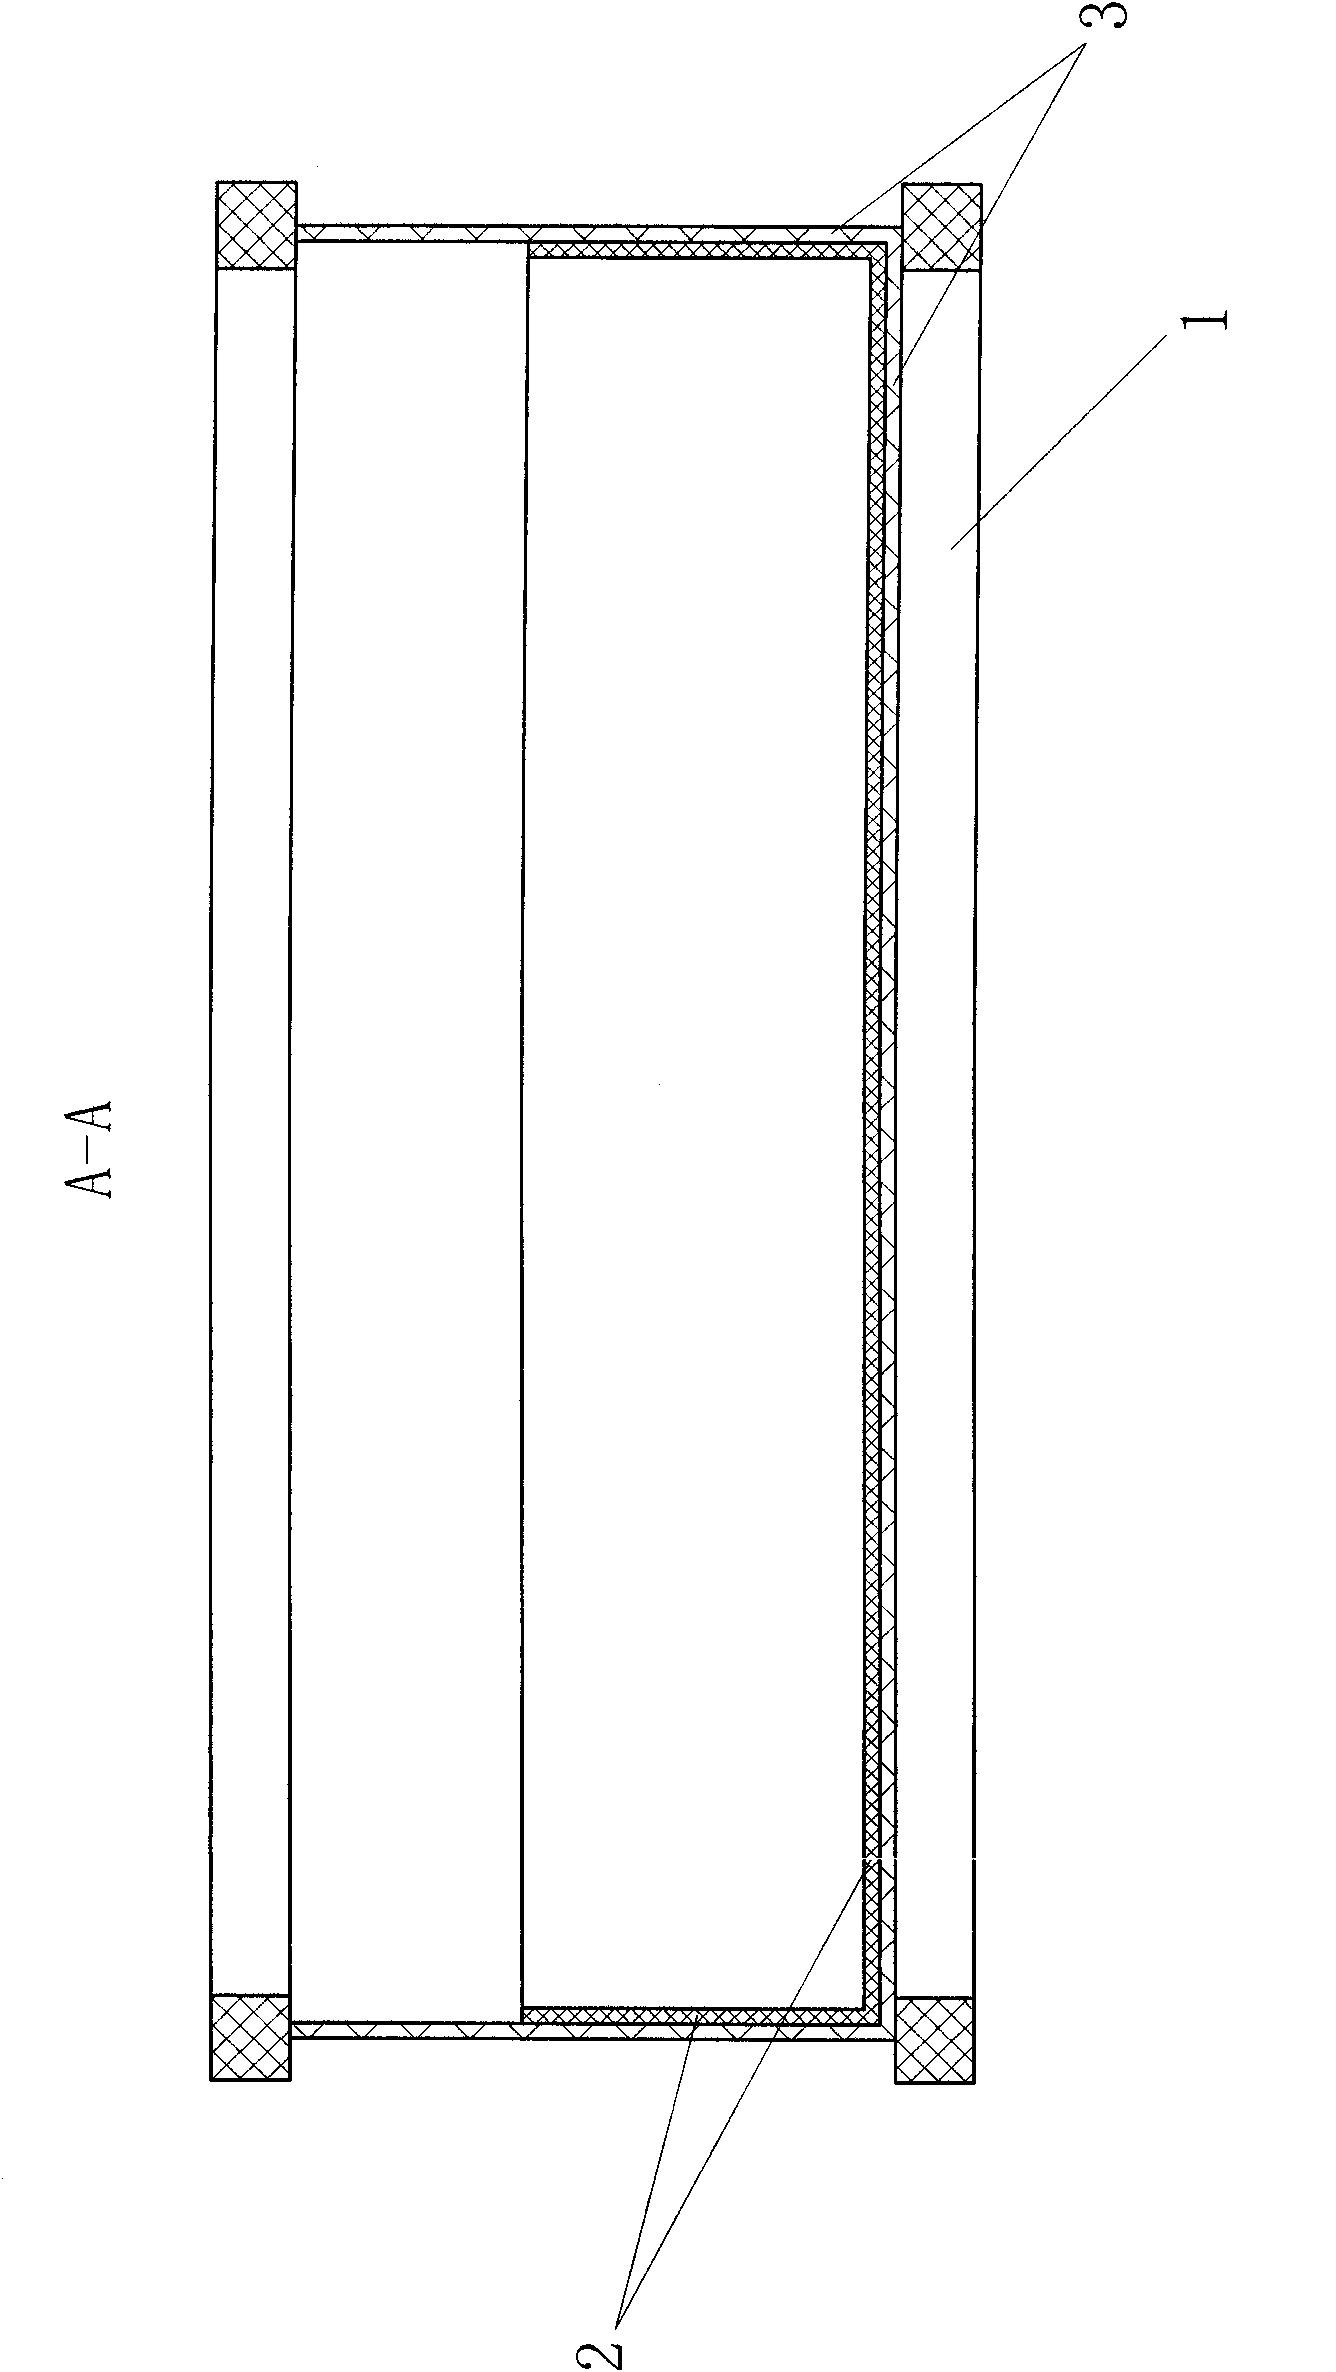 Marine shellfish germchit intermediate cultivation device and application method thereof